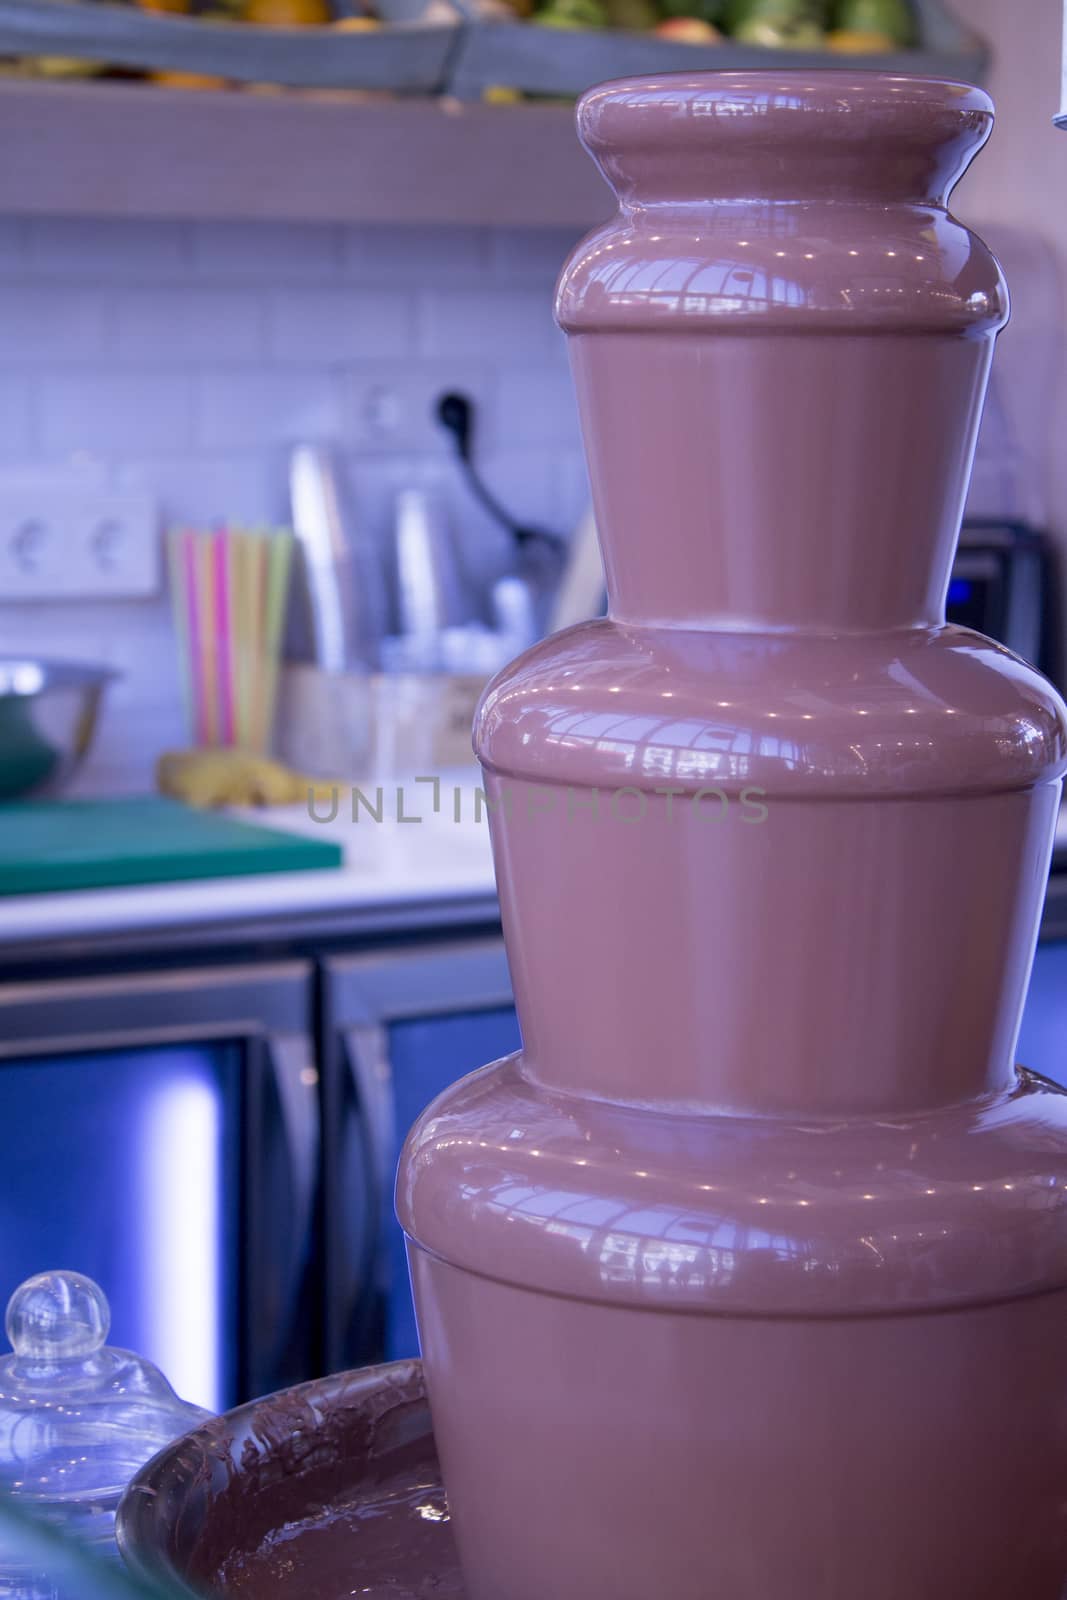 Chocolate fountain in a kitchen